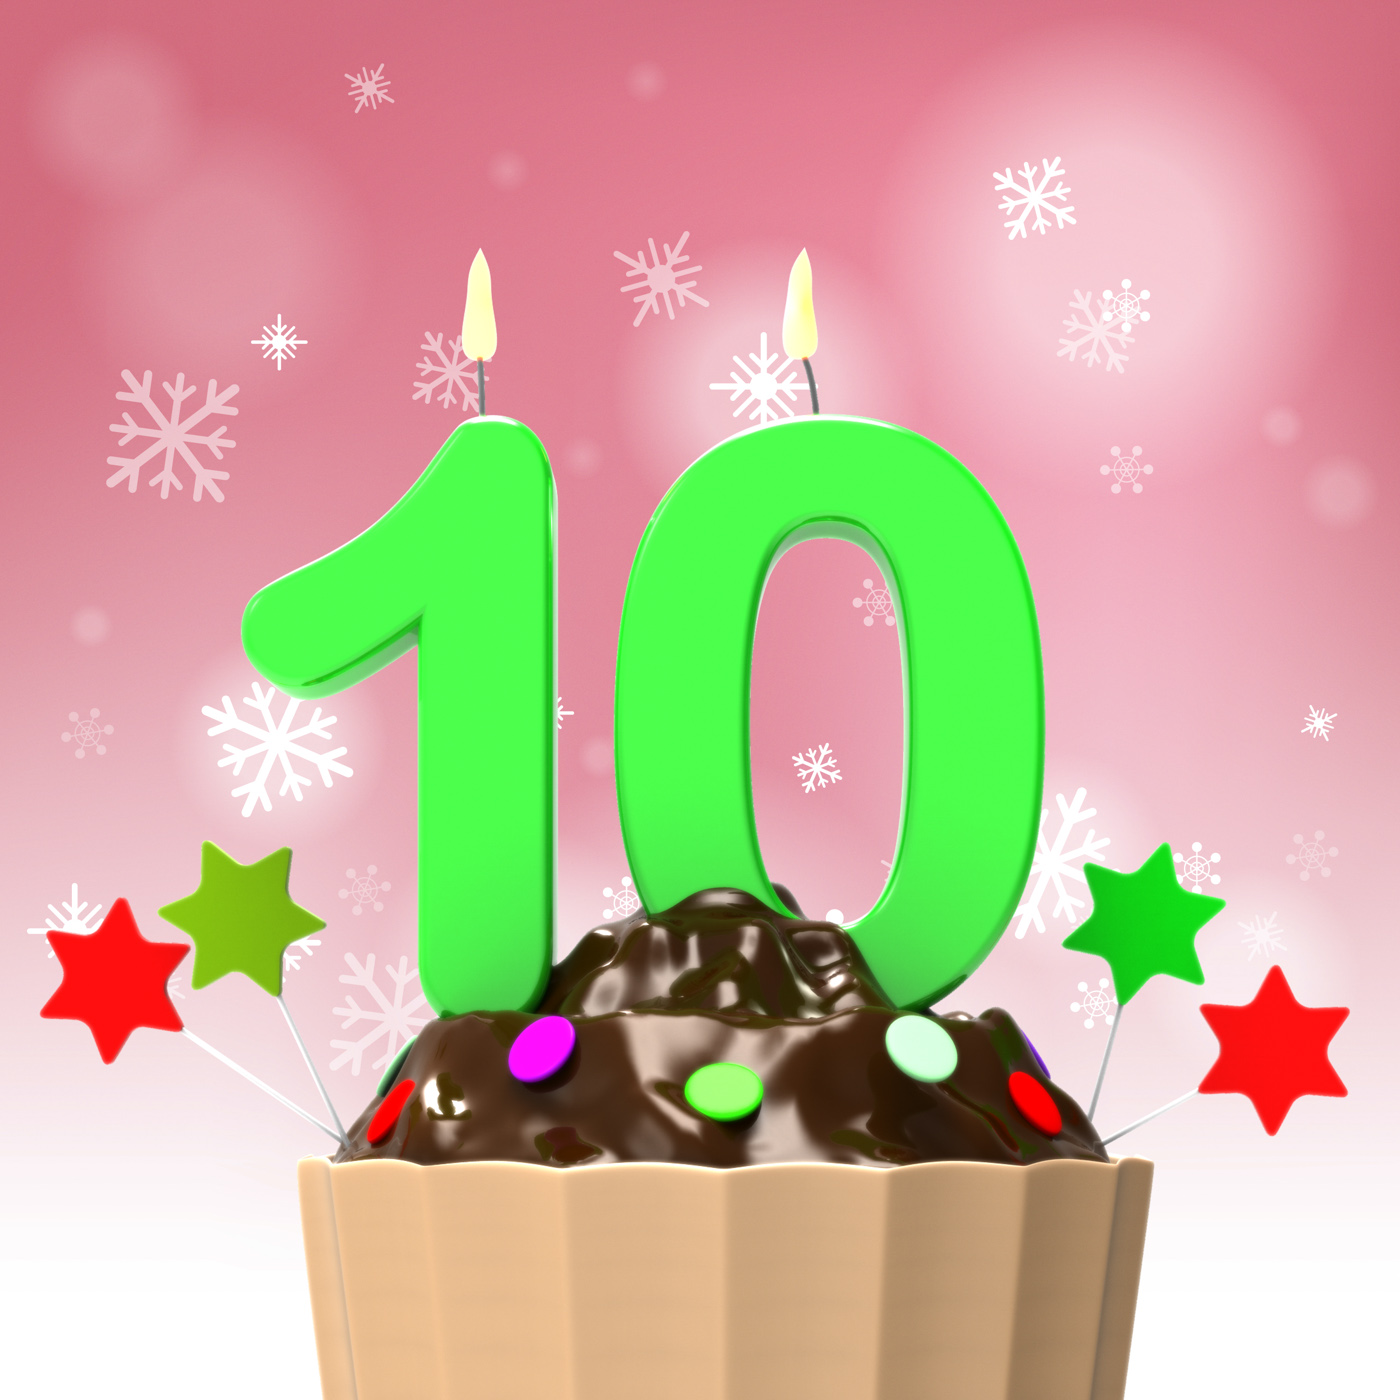 Ten candle on cupcake shows colourful event or birthday party photo